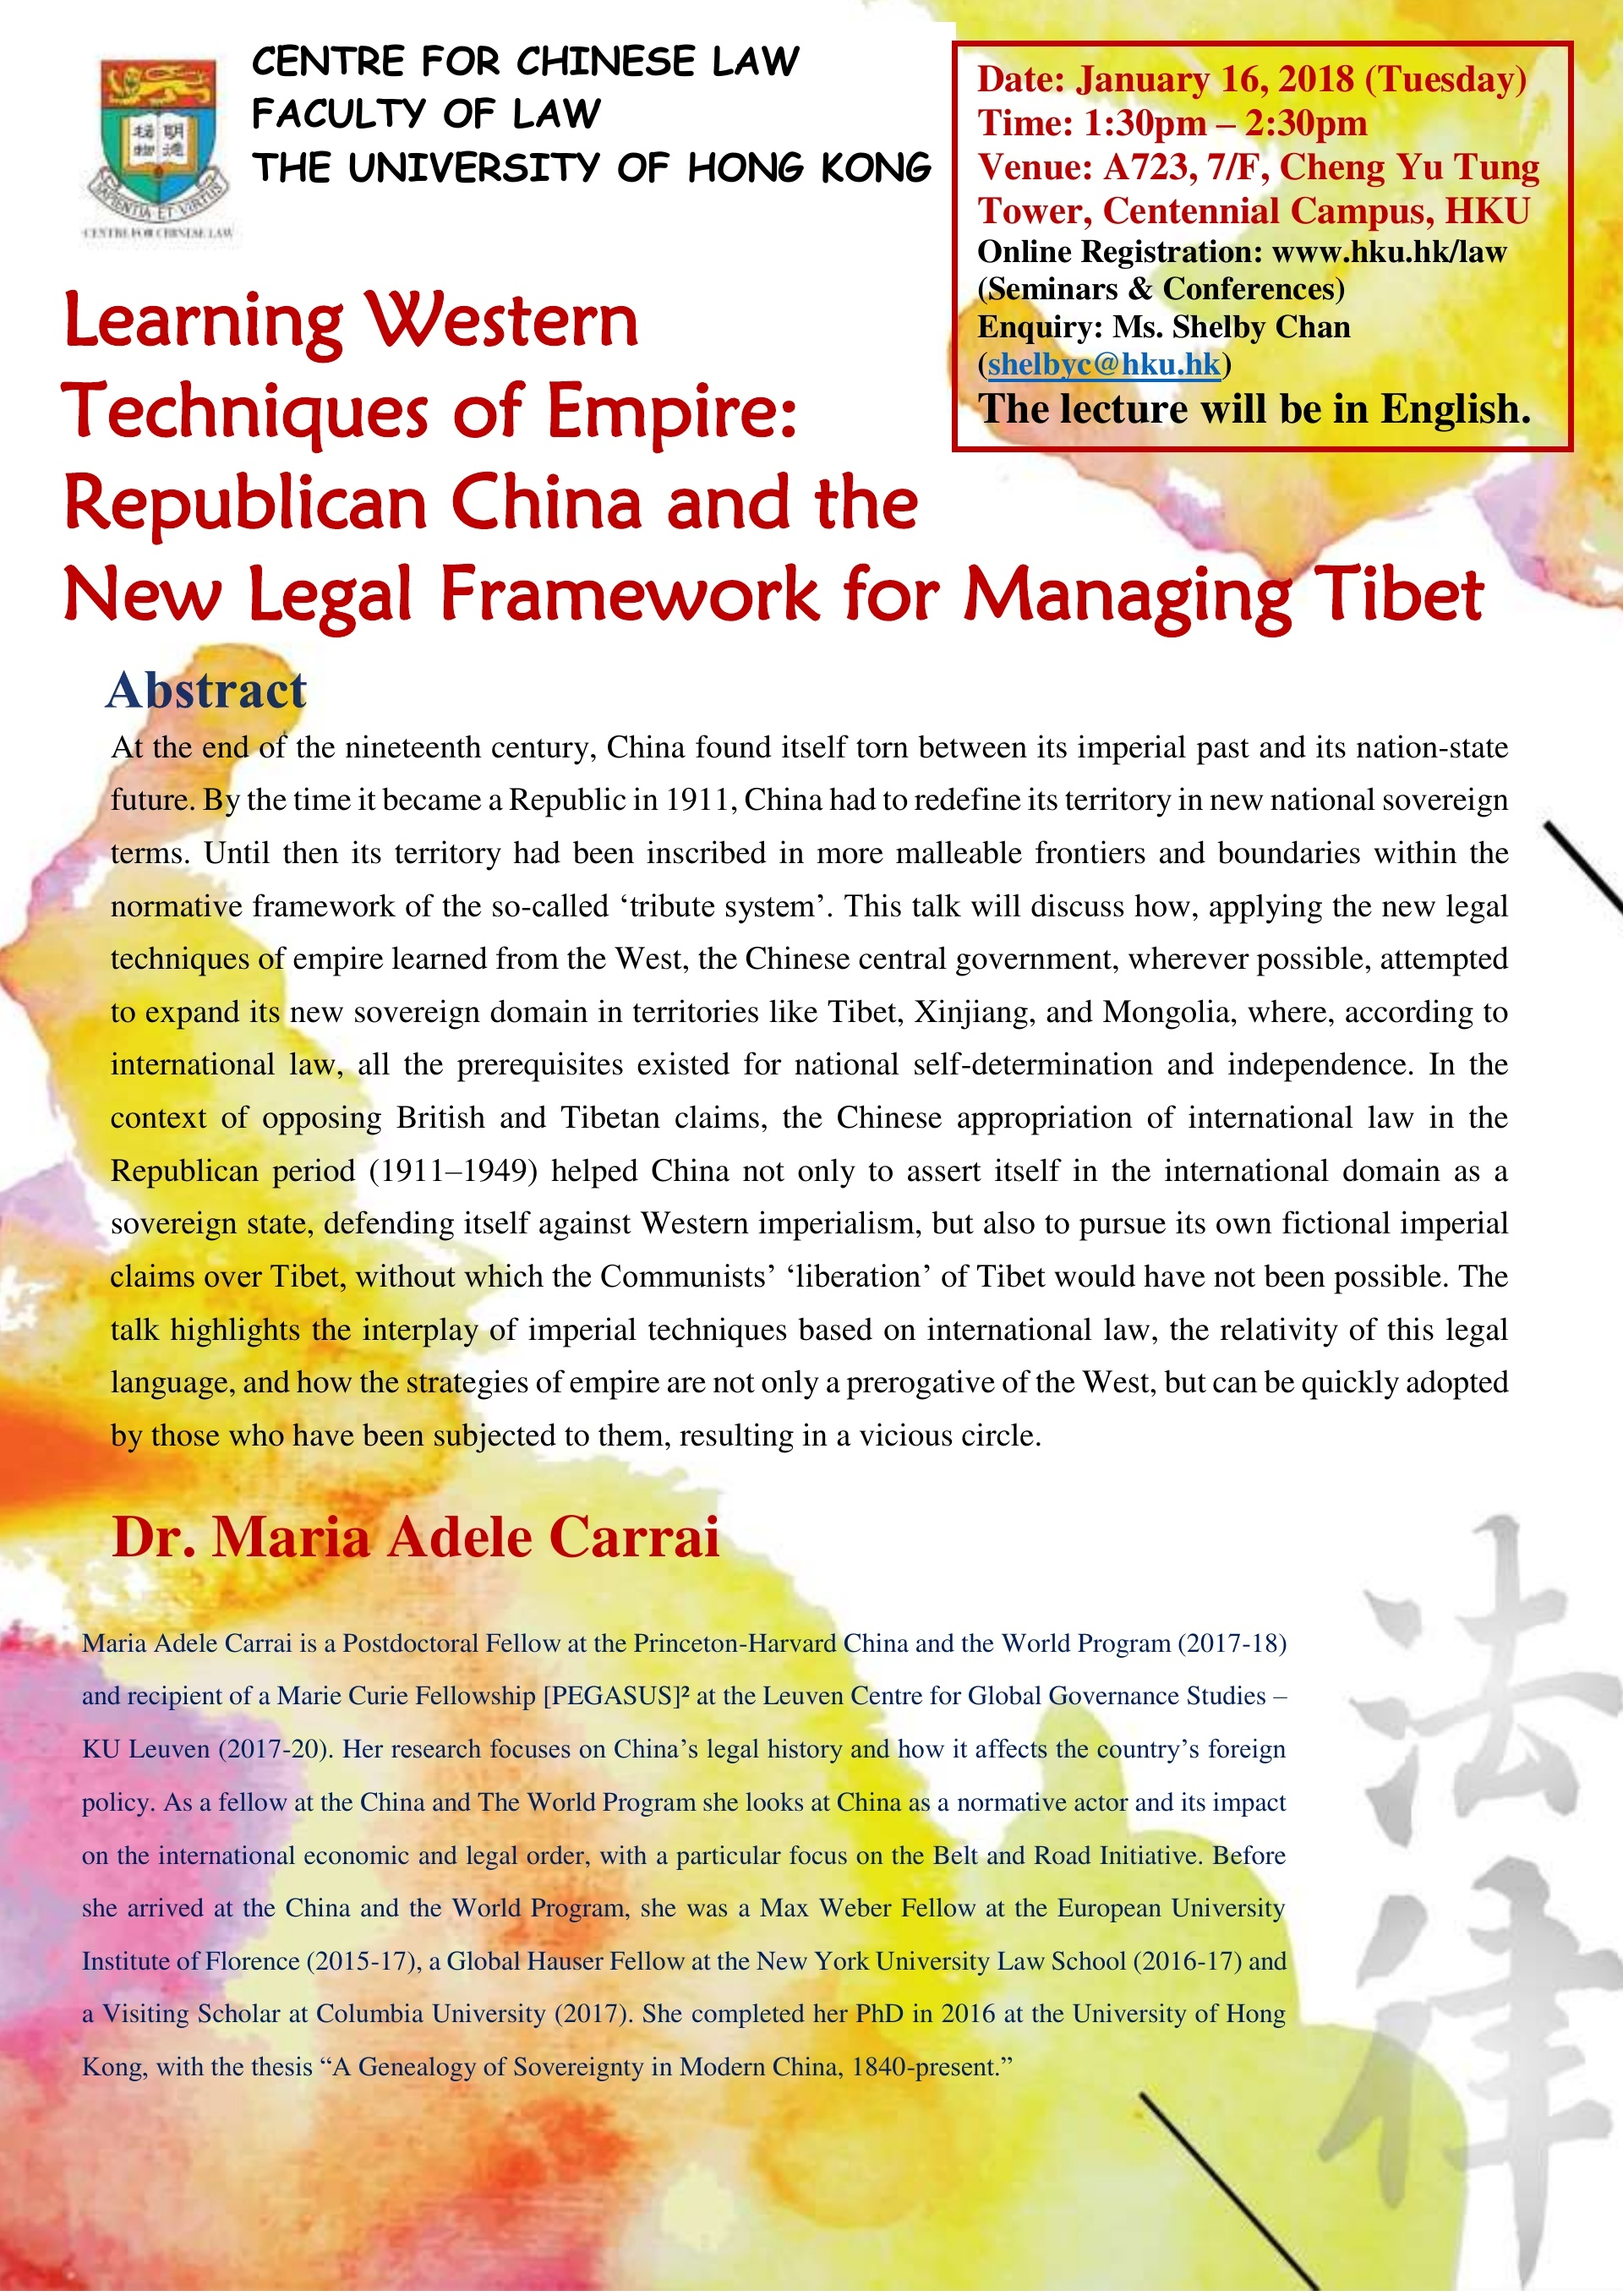 Learning Western Techniques of Empire: Republican China and the New Legal Framework for Managing Tibet